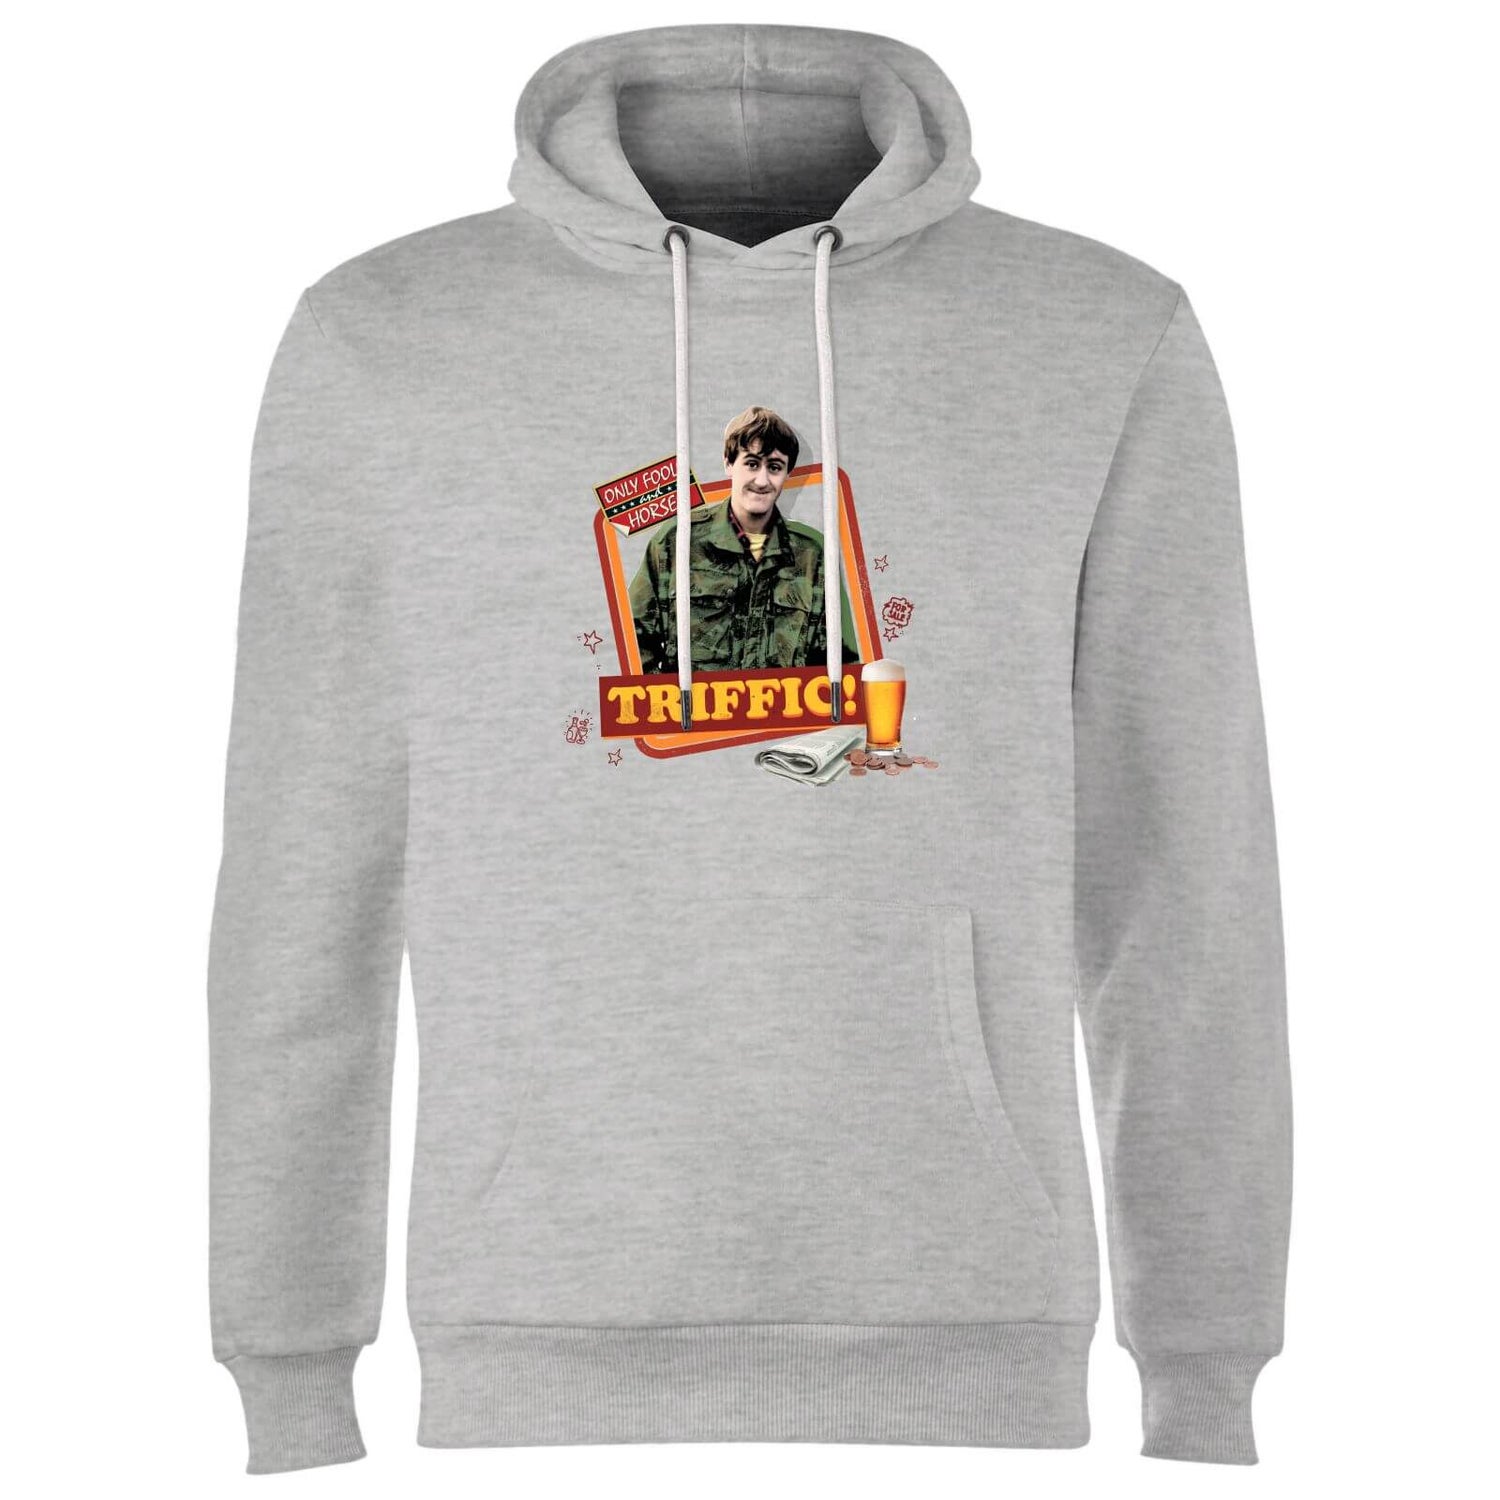 Sudadera con capucha Triffic de Only Fools And Horses - Gris